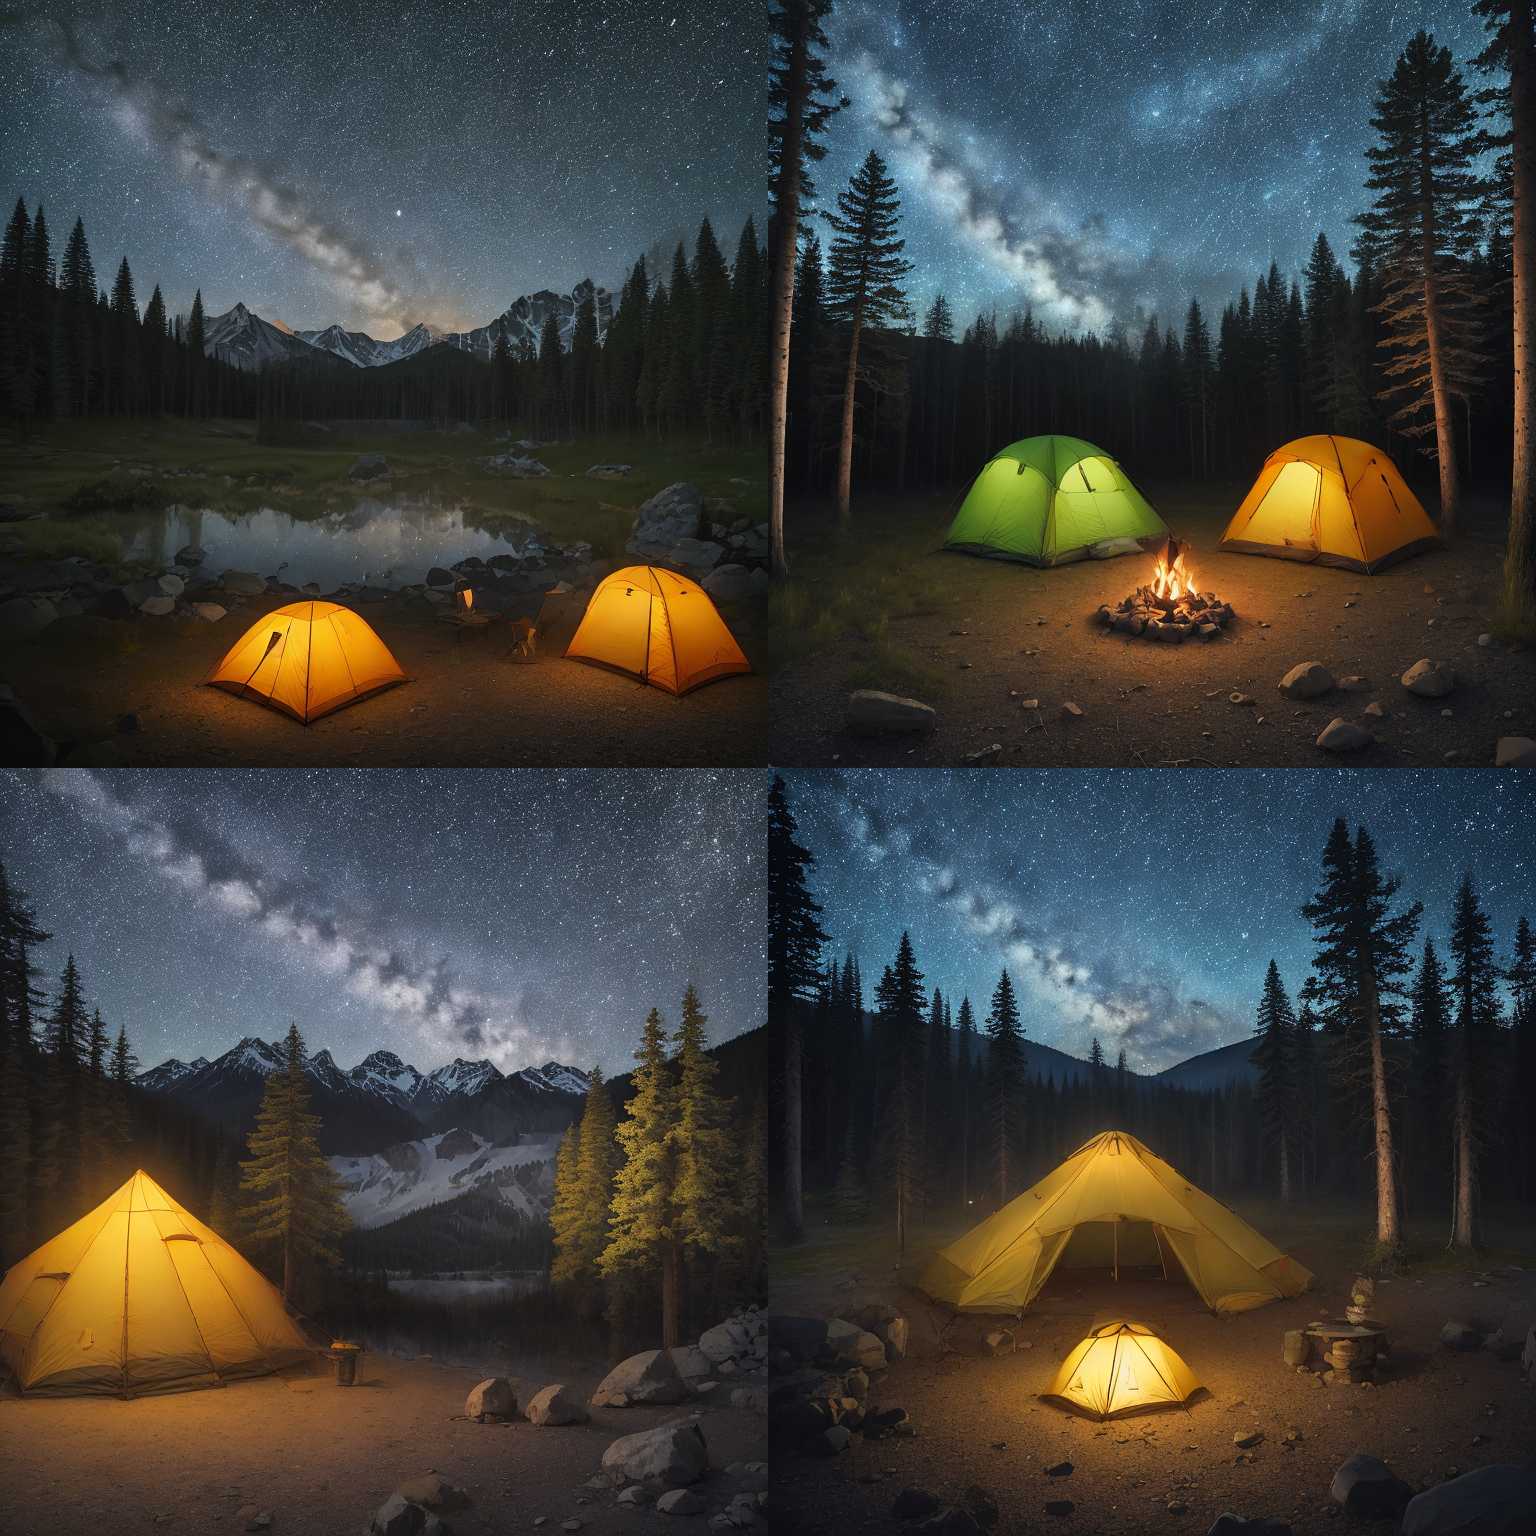 A campsite at night